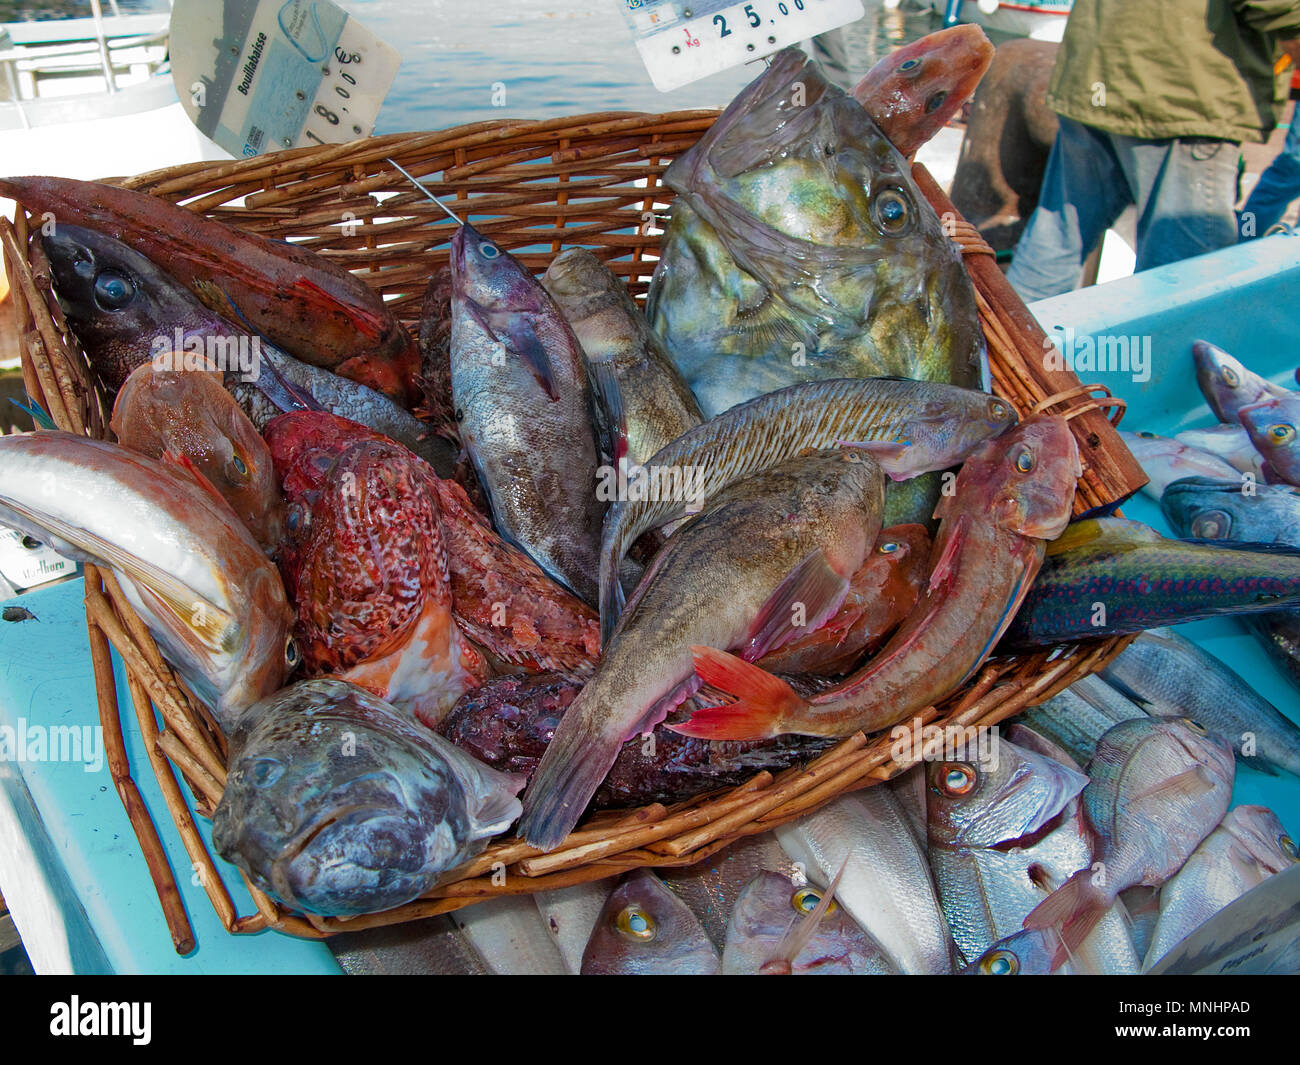 Catch of the day, fresh fishes at harbour Vieux Port, Marseille, Bouches-du-Rhone, Provence-Alpes-Côte d’Azur, South France, France, Europe Stock Photo